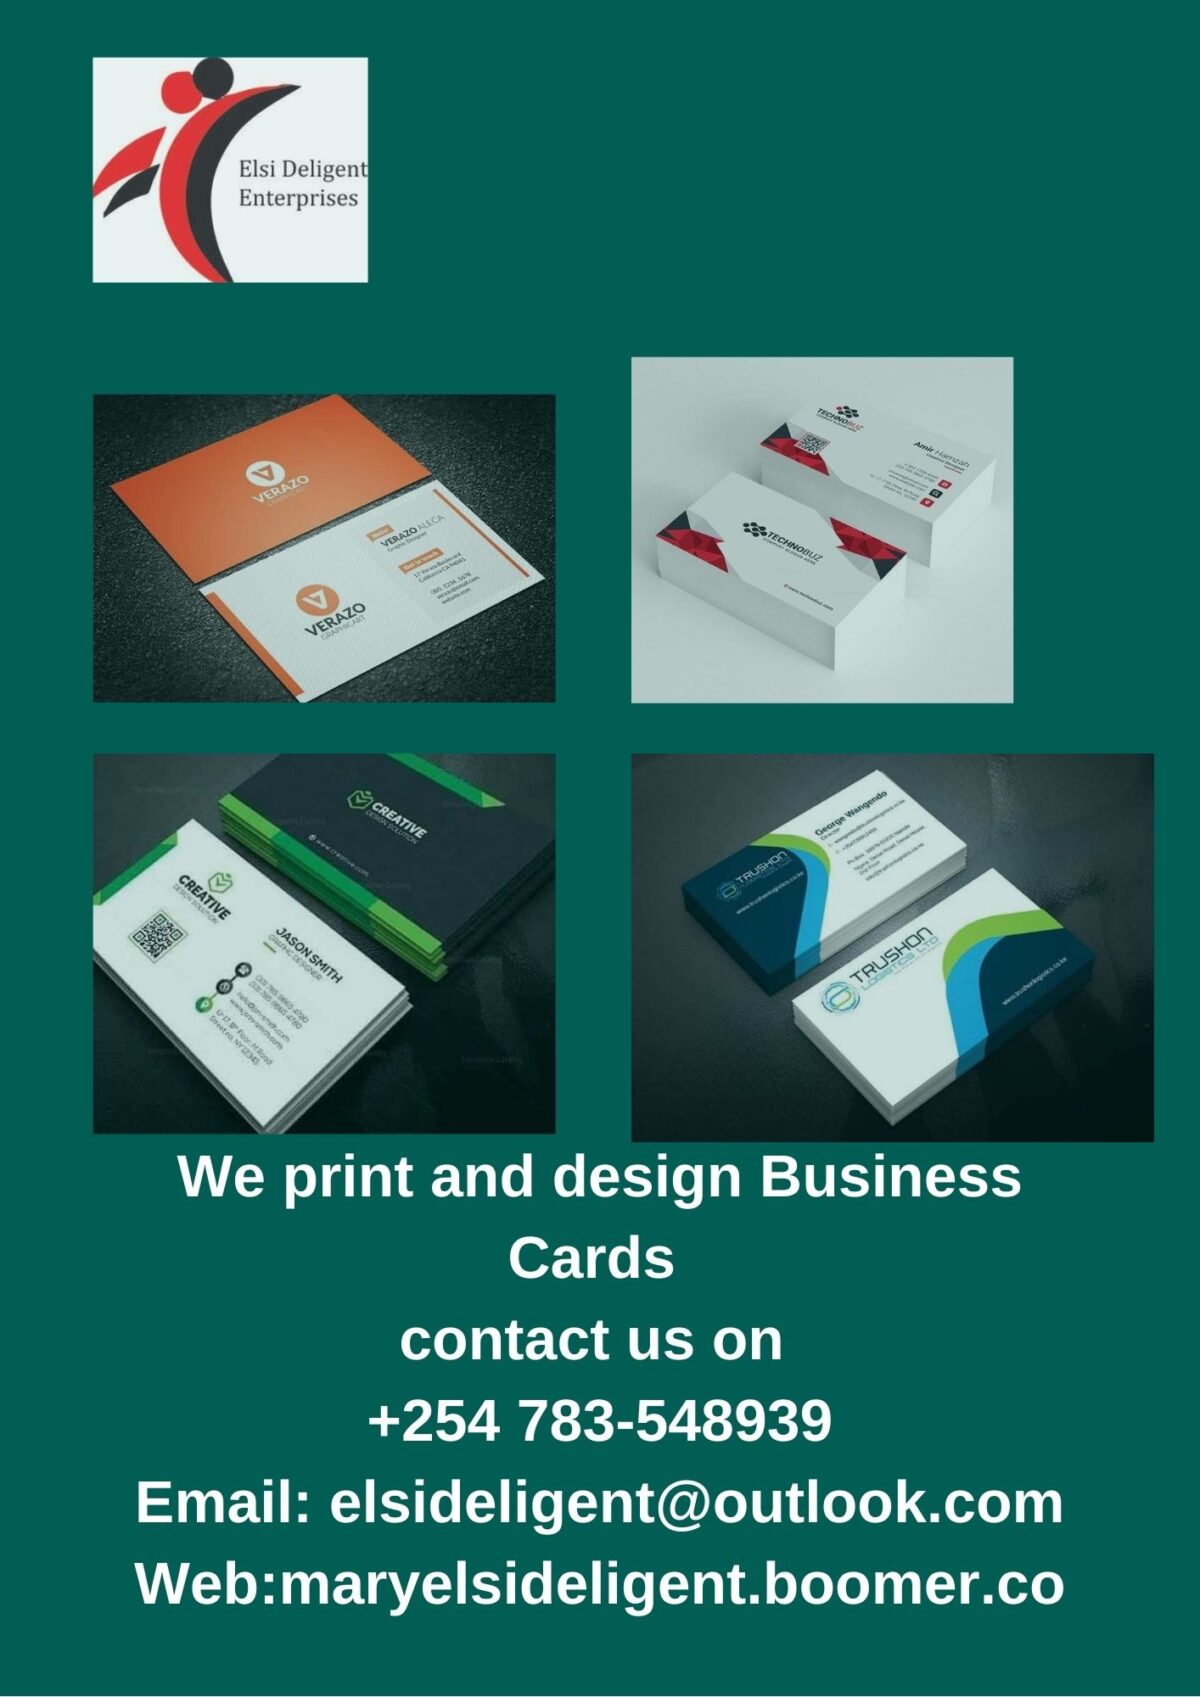 We print and design Business Cards contact us on +254 783-548939 Email_ elsideligent@outlook.com Web_maryelsideligent.boomer.co (3)